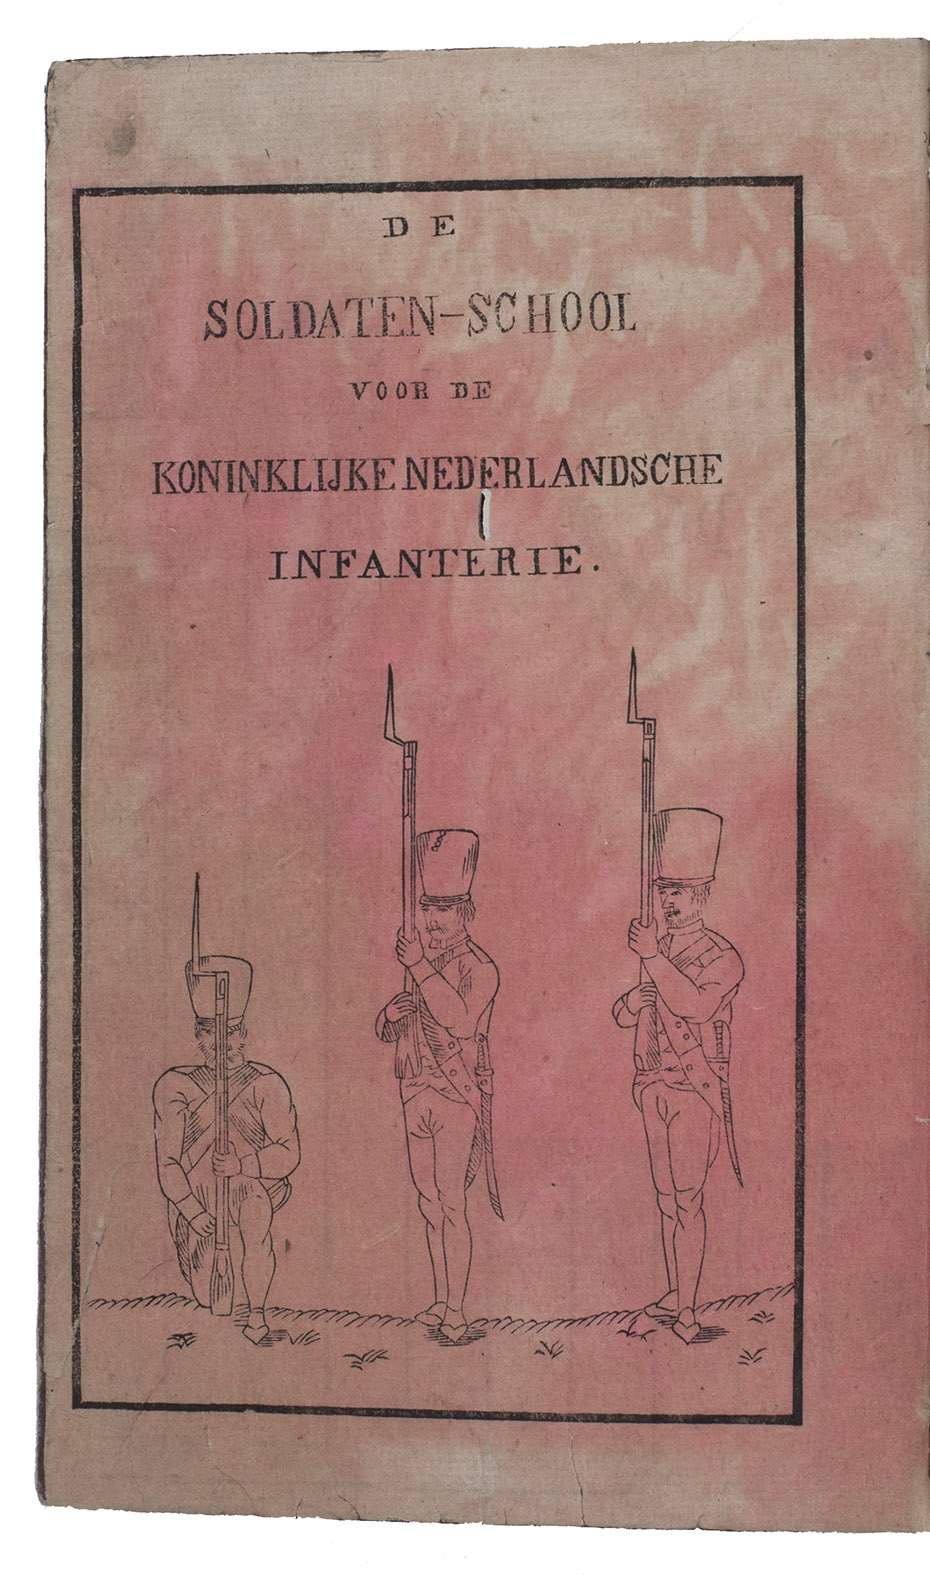 [MILITARIA - JAPAN]. - De soldaten-school voor de Koninklijke Nederlandsche infanterie.[copy imprint:] The Hague & Amsterdam, Gebroeders van Cleef, 1833 (last leaf: Tokyo, Juij Masuda, 1856). 8vo. Printed from woodblocks on Japanese paper in the traditional Japanese manner on the outside of double leaves with the fold at the fore-edge. With woodcut Japanese text on the half title and last leaf. With an illustrated title-page printed on paper which has been dyed red, facing the half-title, showing three soldiers. Contemporary Japanese brown paper covers, side stitched and oversewn through 4 holes (near the head and near the foot and 2 holes between them). In a modern Japanese gold brocade cloth chitsu (folding case) with 2 bone fastenings and a brown paper label.